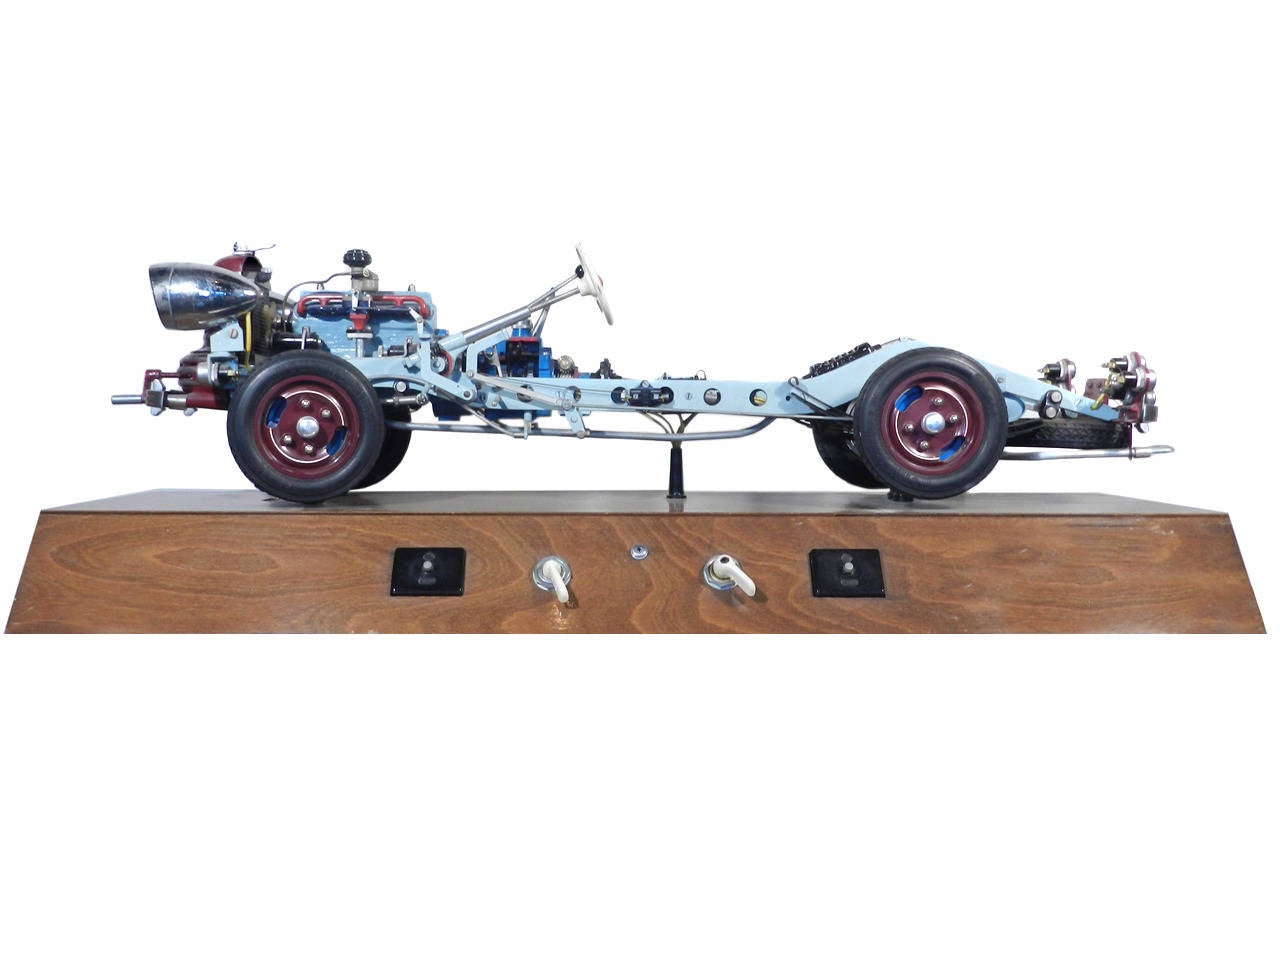 A striking example of a rare pre WWII instructional auto model made by HOHM Modelle Co. It is fantastic in both detail and execution. 42' overall, all metal, with cutaways of the working transmission, driveshaft, and rear end. It has head lights and